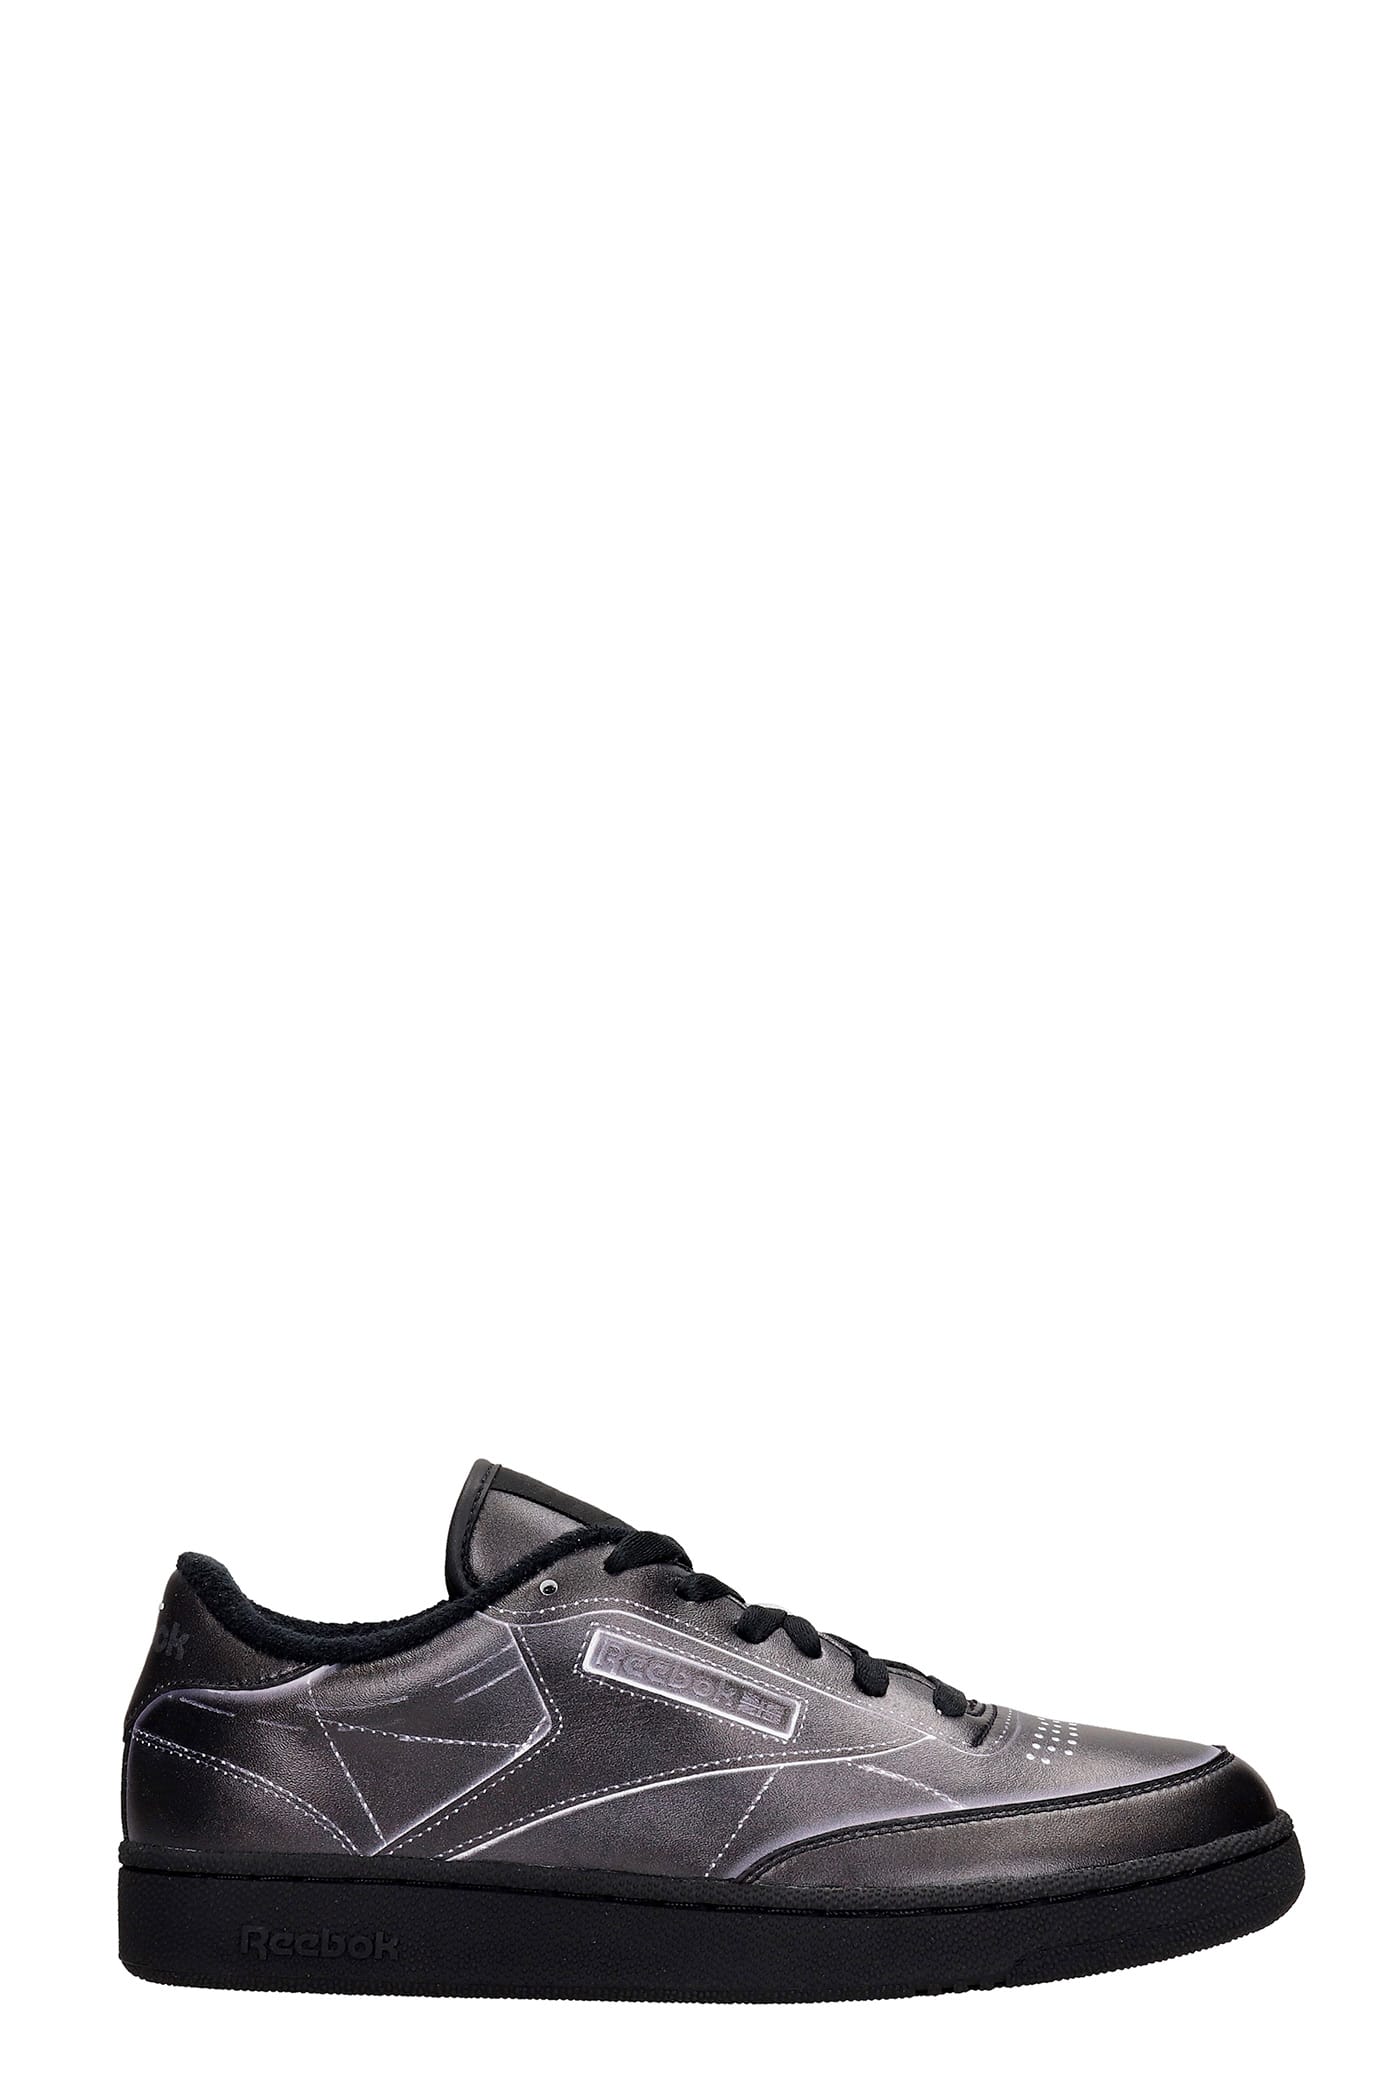 Maison Margiela Project 00 Sneakers In Black Leather